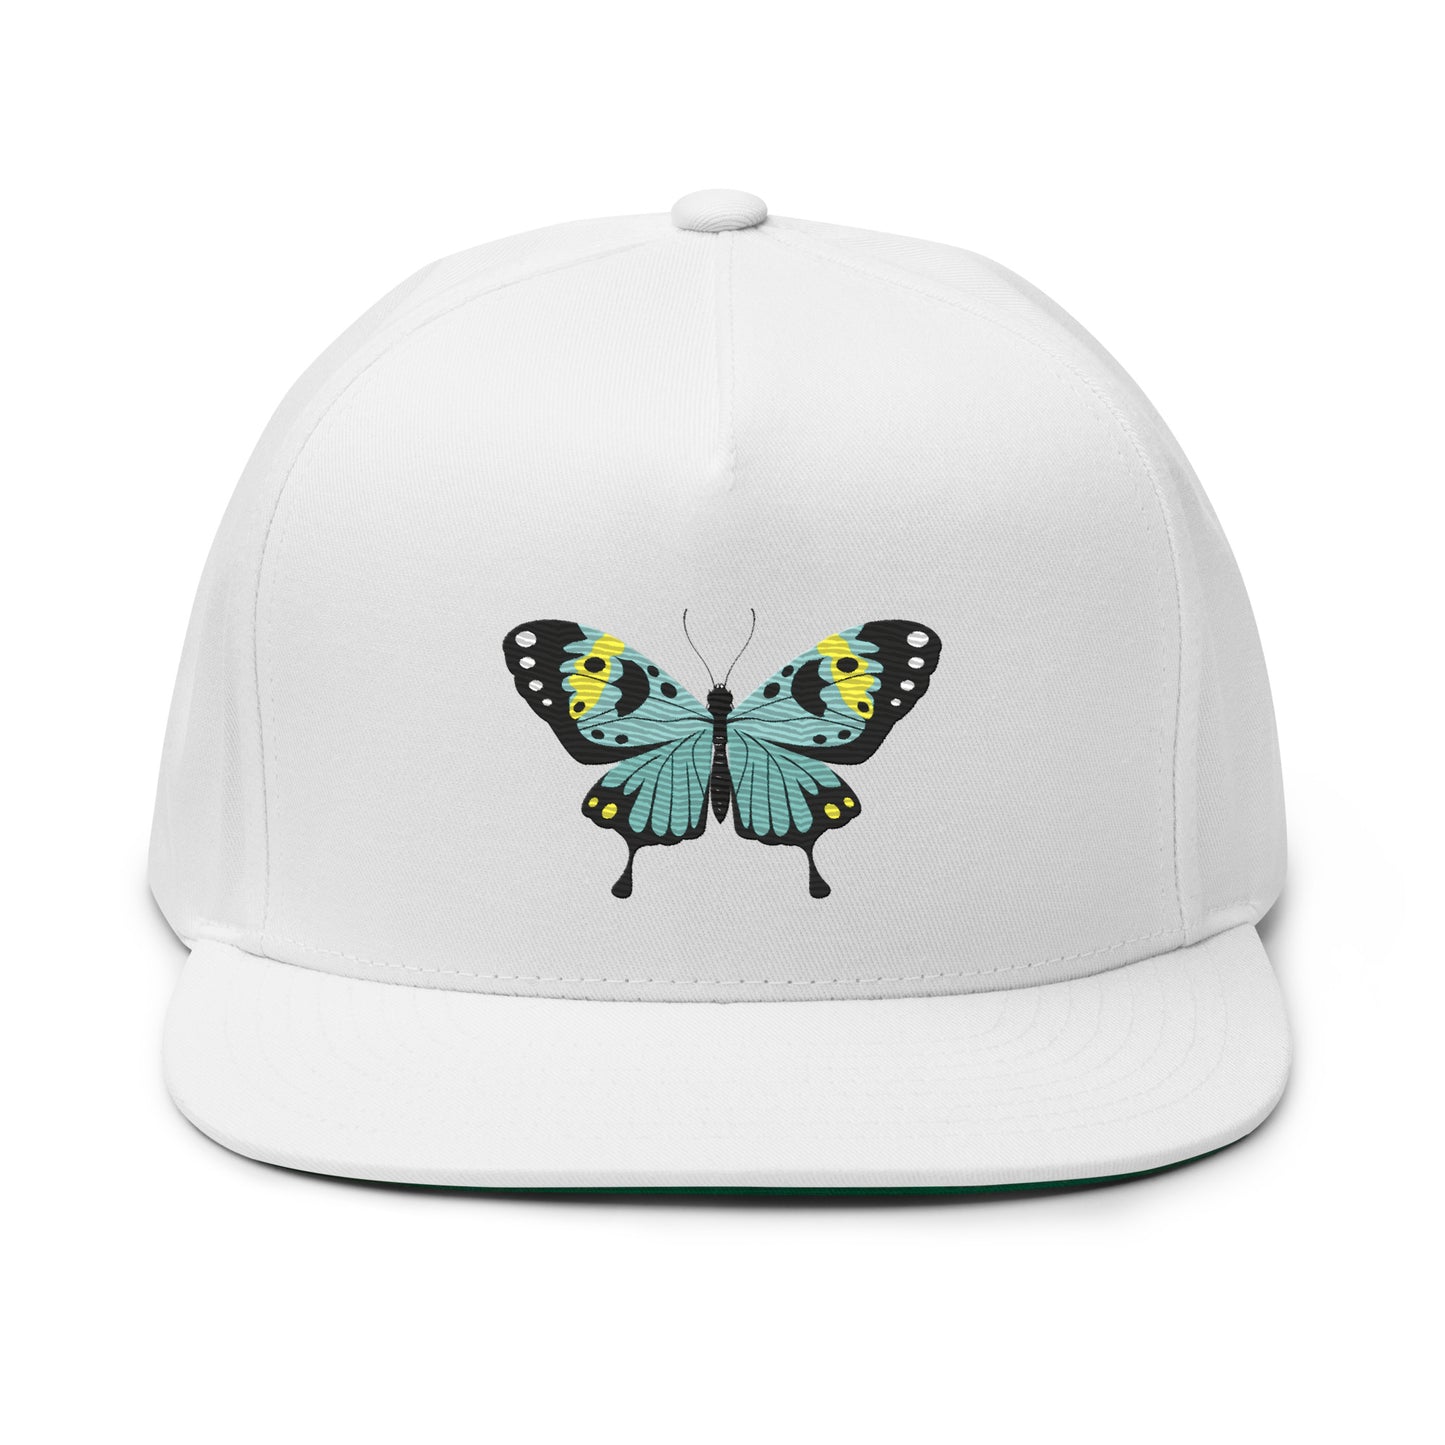 Flat Bill Cap embroidered with a butterfly